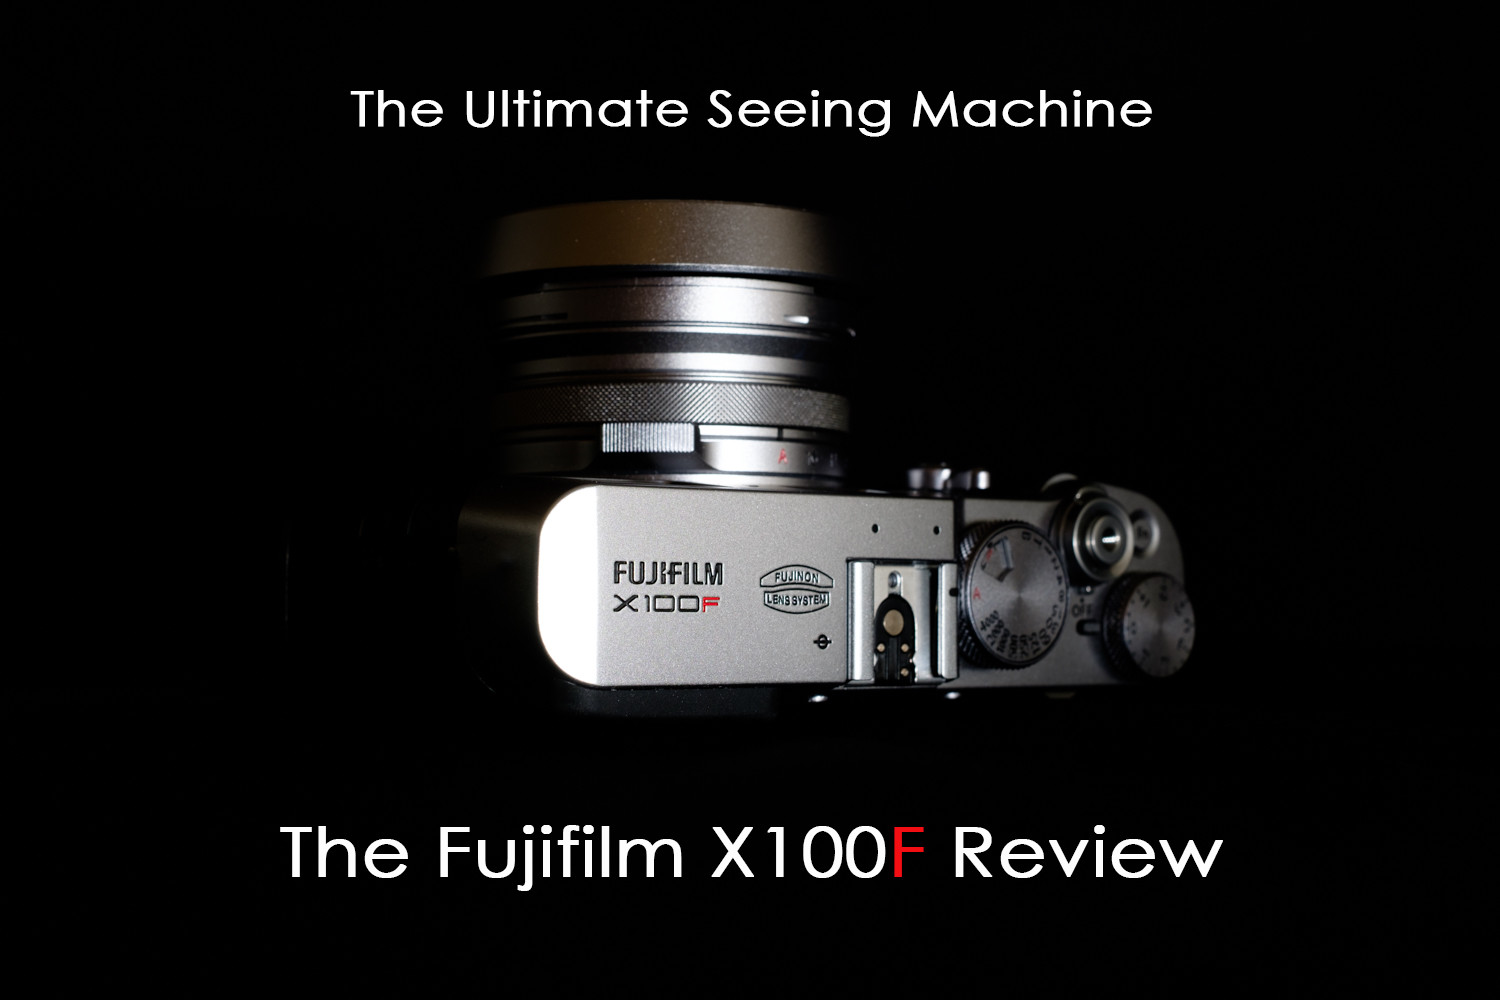 The Ultimate Seeing Machine – The Fujifilm X100F Review